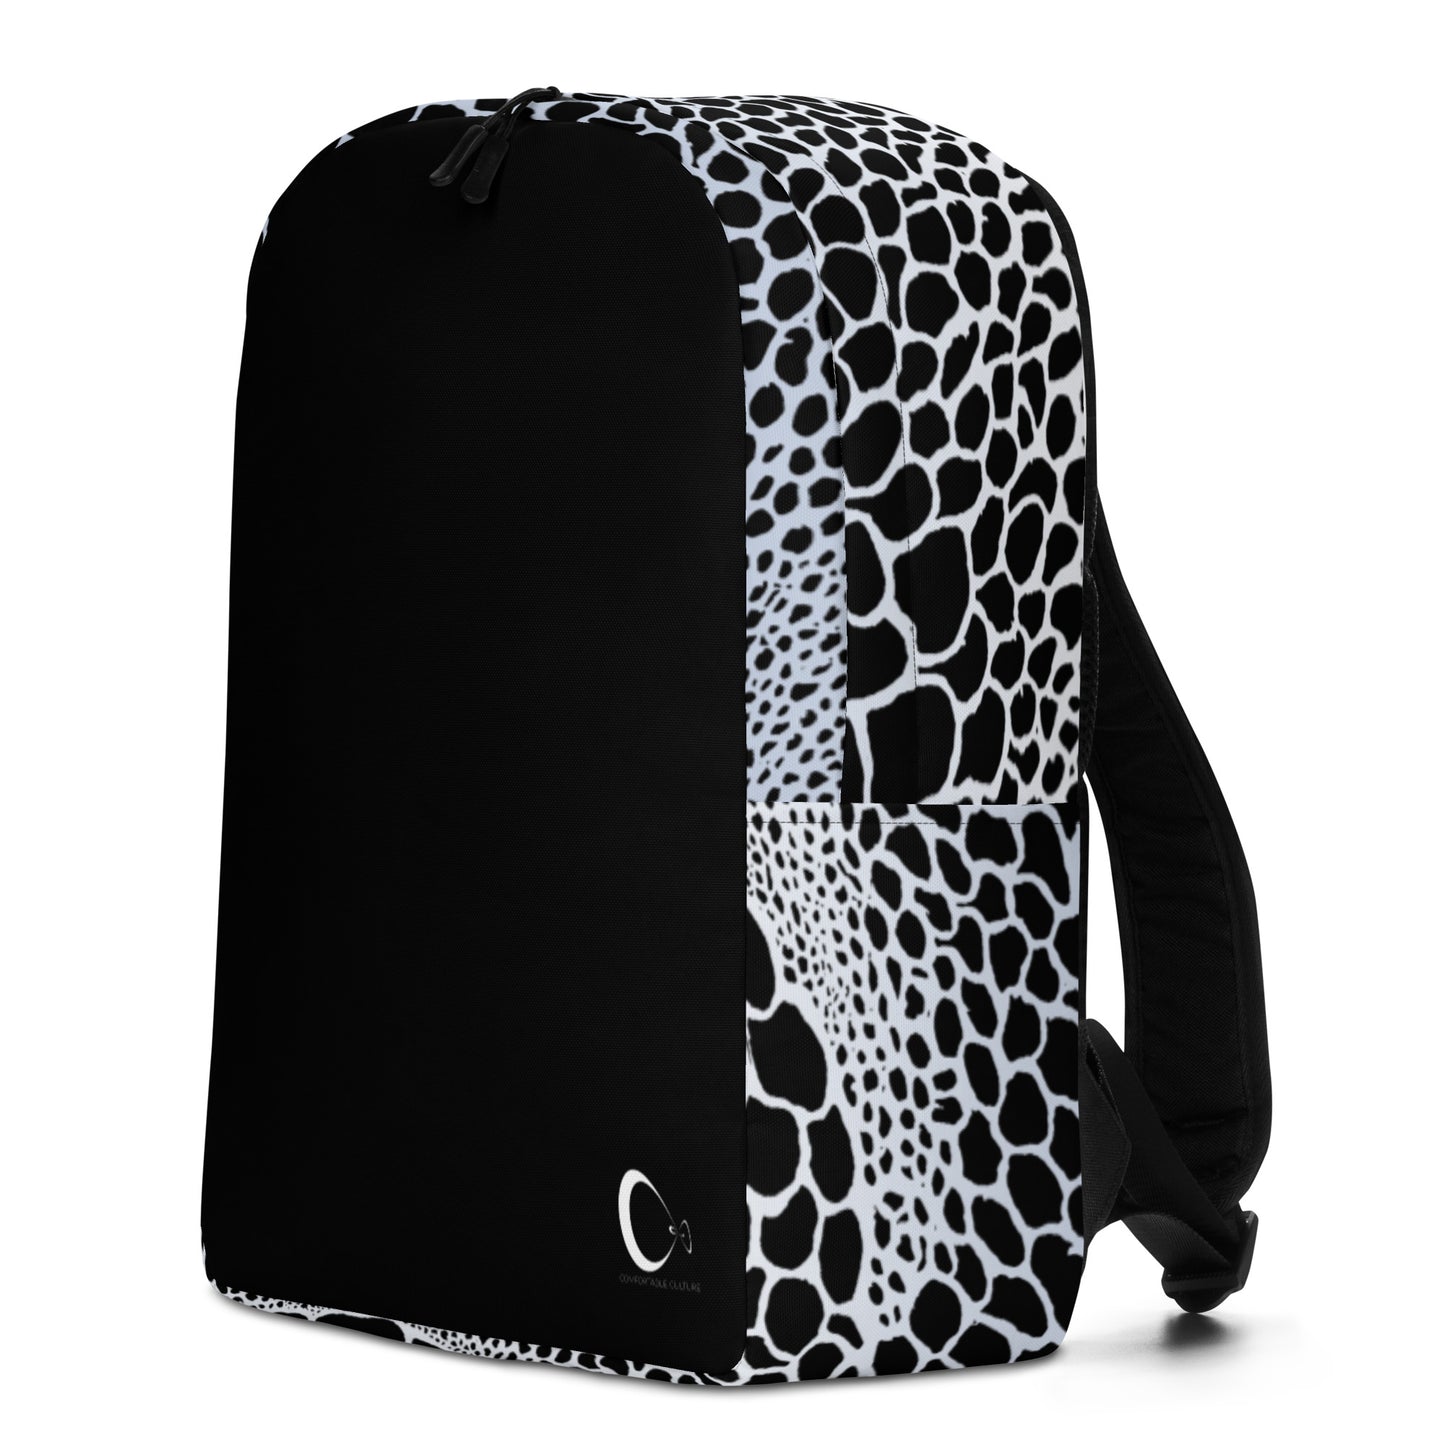 Wild Black and White Organic Print Backpack | Modern & Minimalist Water-Resistant Laptop Backpack with Hidden Pocket | - Comfortable Culture - Backpacks - Comfortable Culture